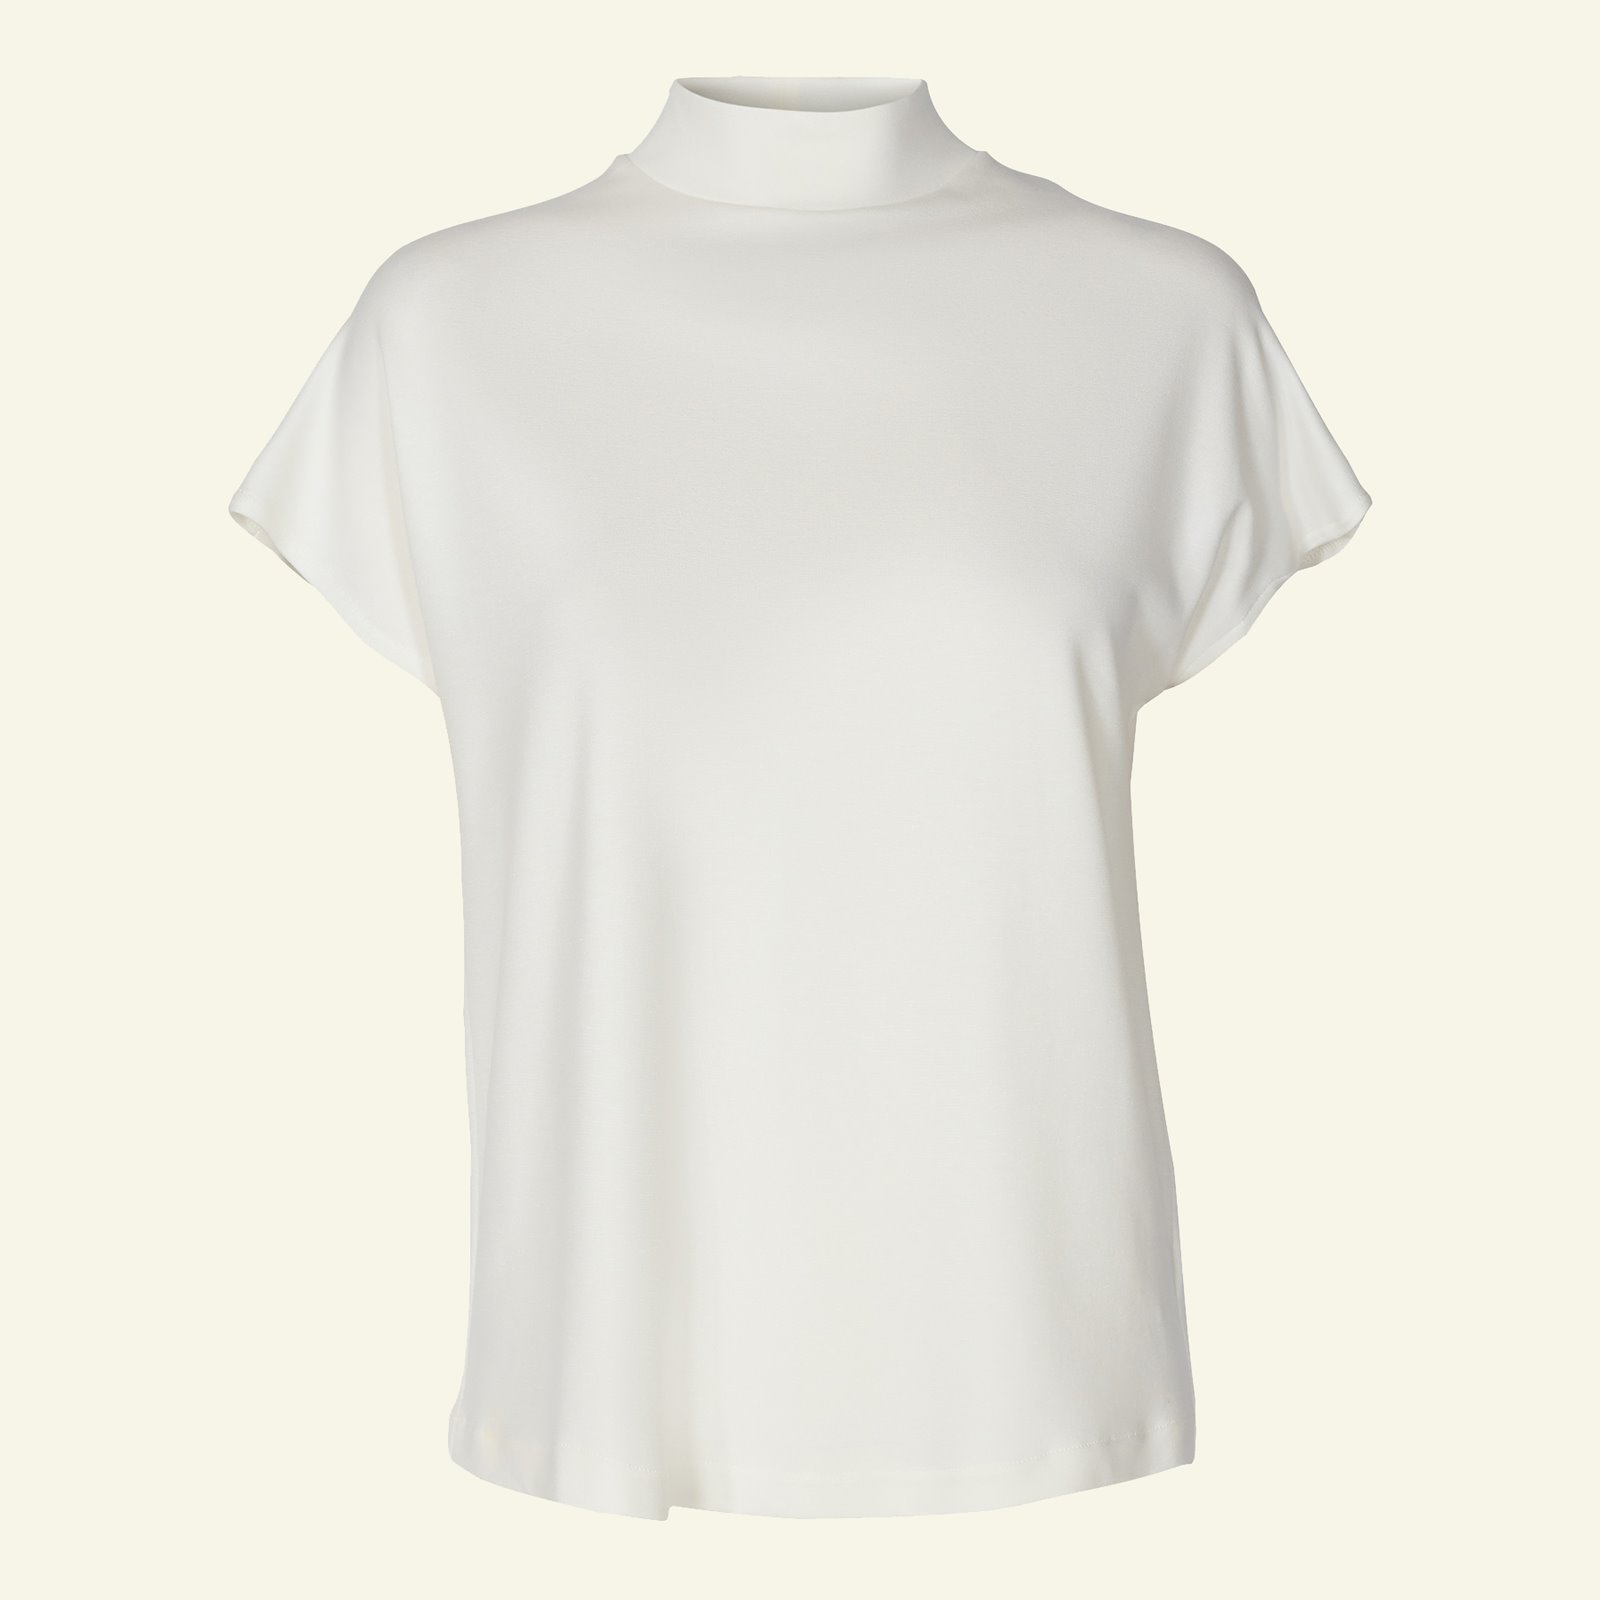 T-shirt and dress with high-neck, 34/6 p22069_270412_sskit